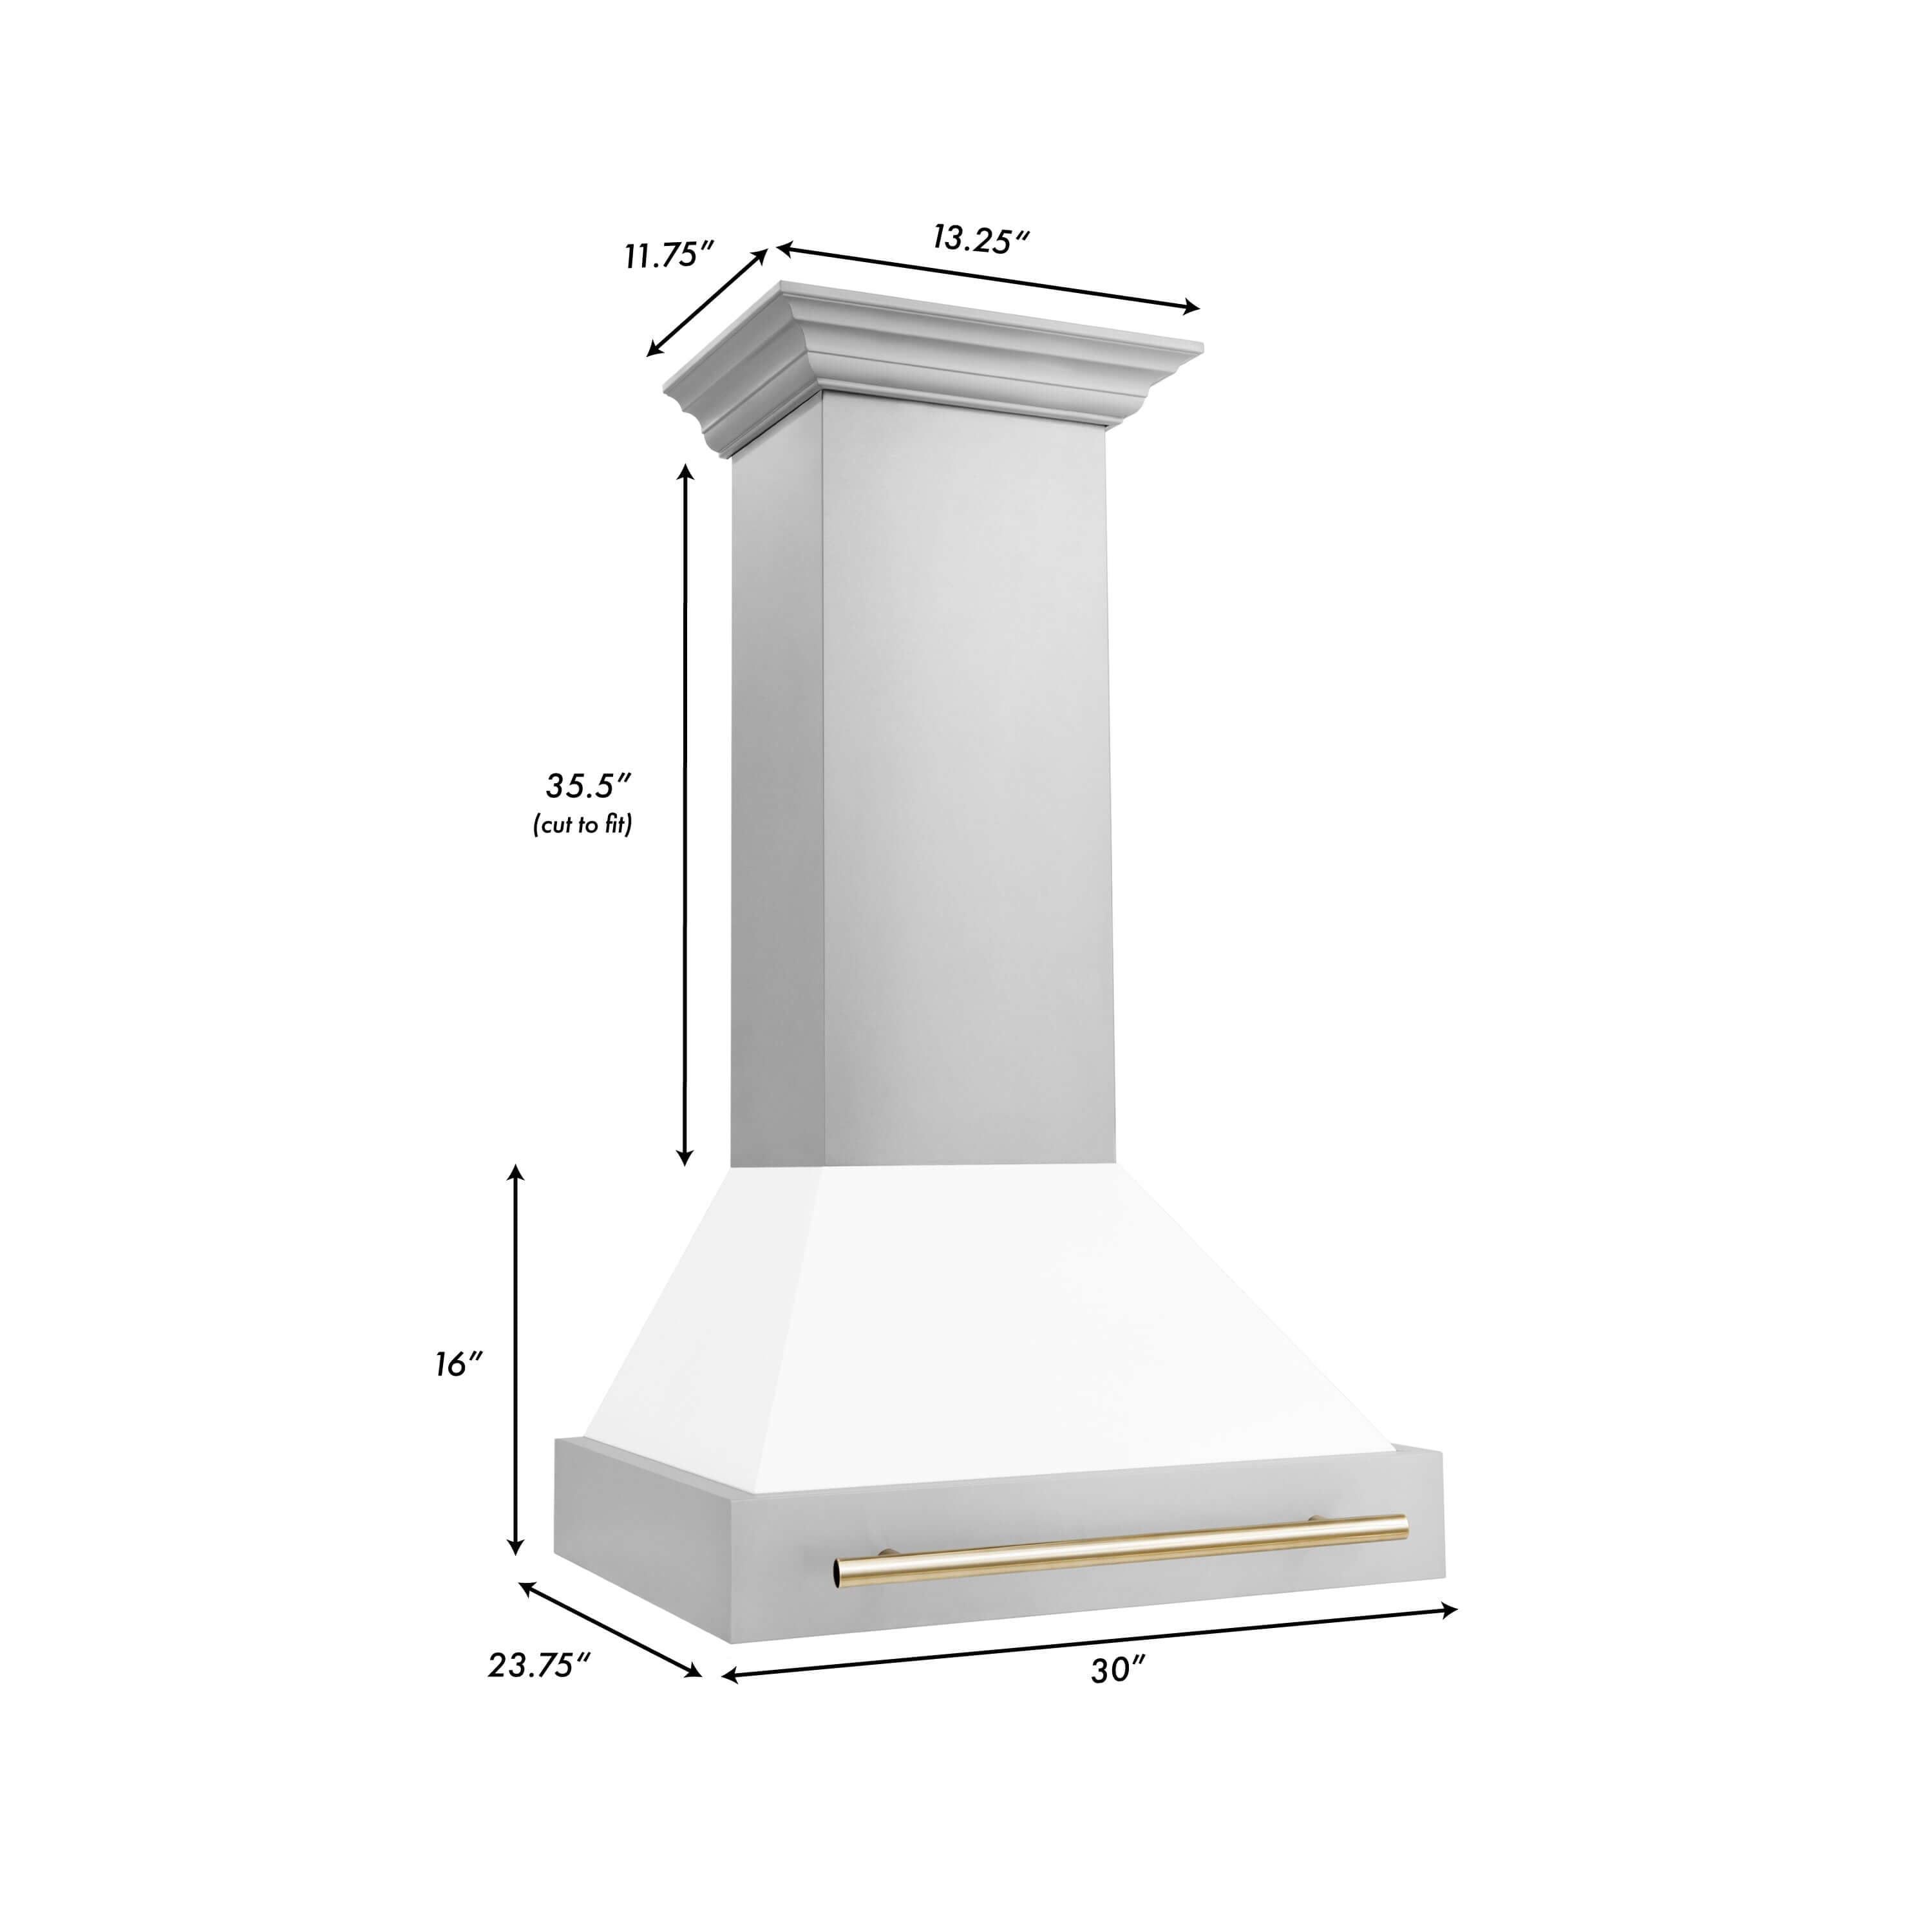 30" ZLINE Autograph Edition Stainless Steel Range Hood with White Matte Shell and Matte Black Handle (8654STZ-WM30-MB)